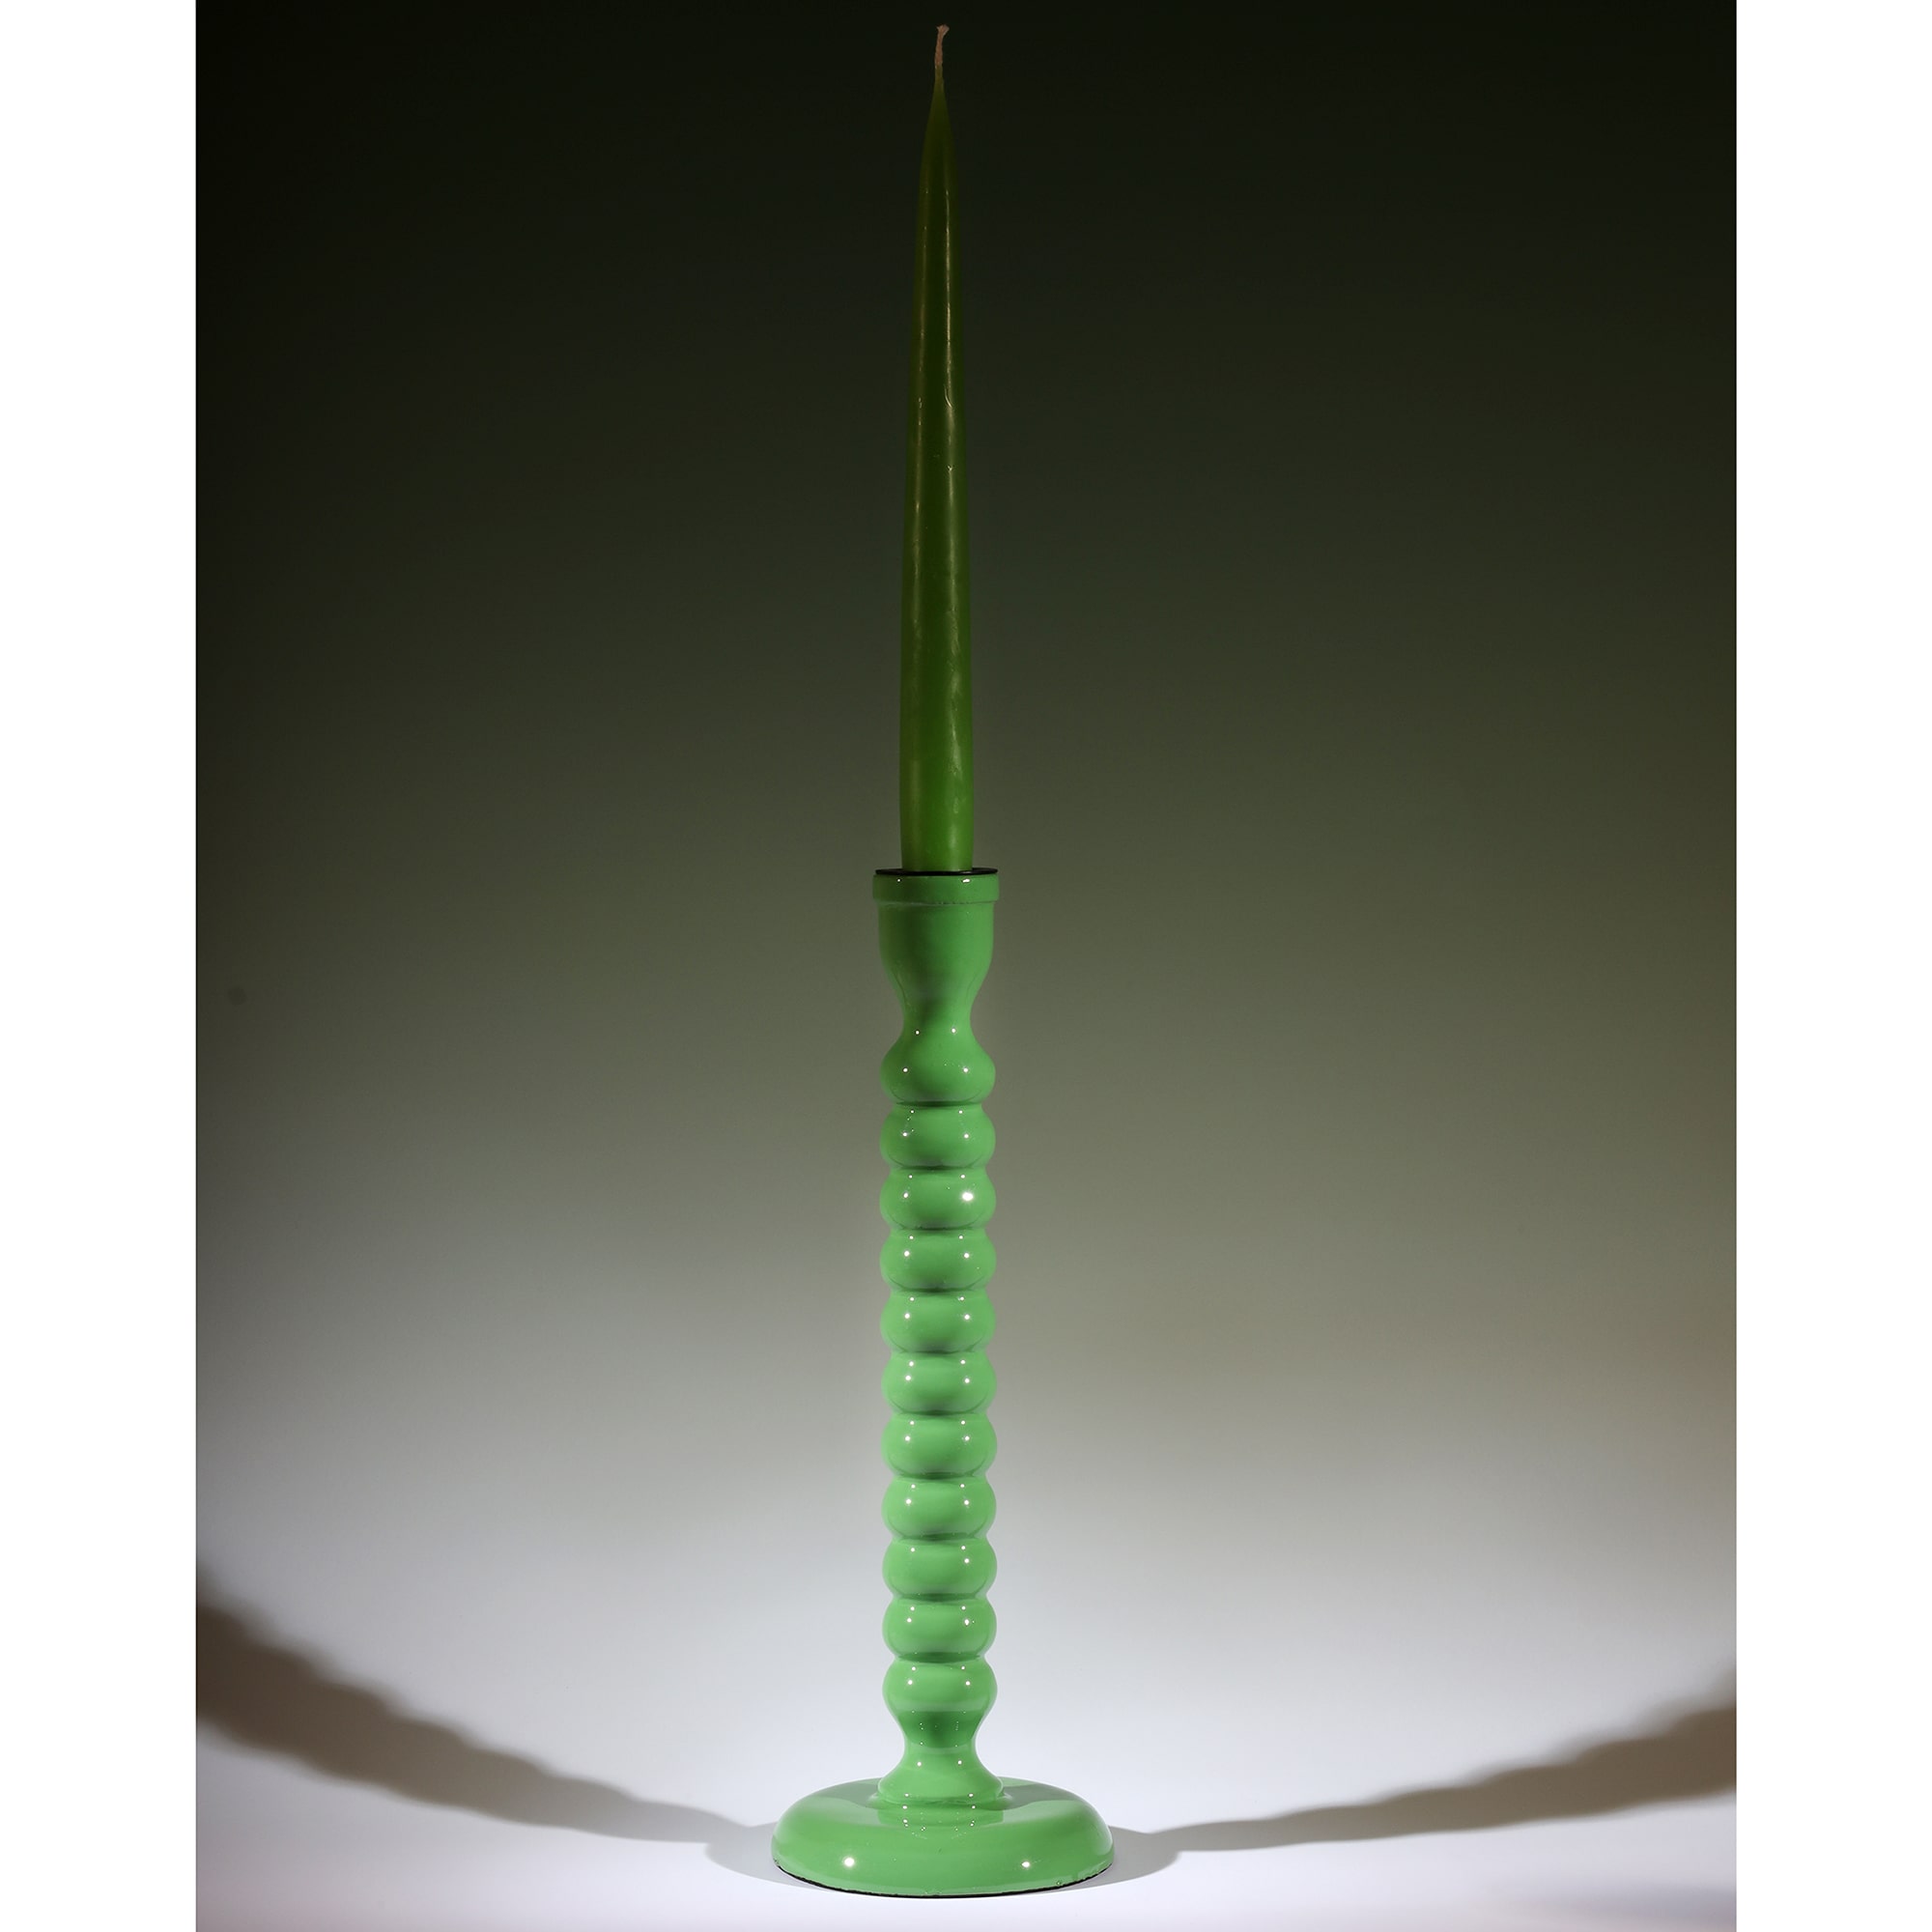 Bud Green Polished Lacquer Drift Candle holder with a matching candle